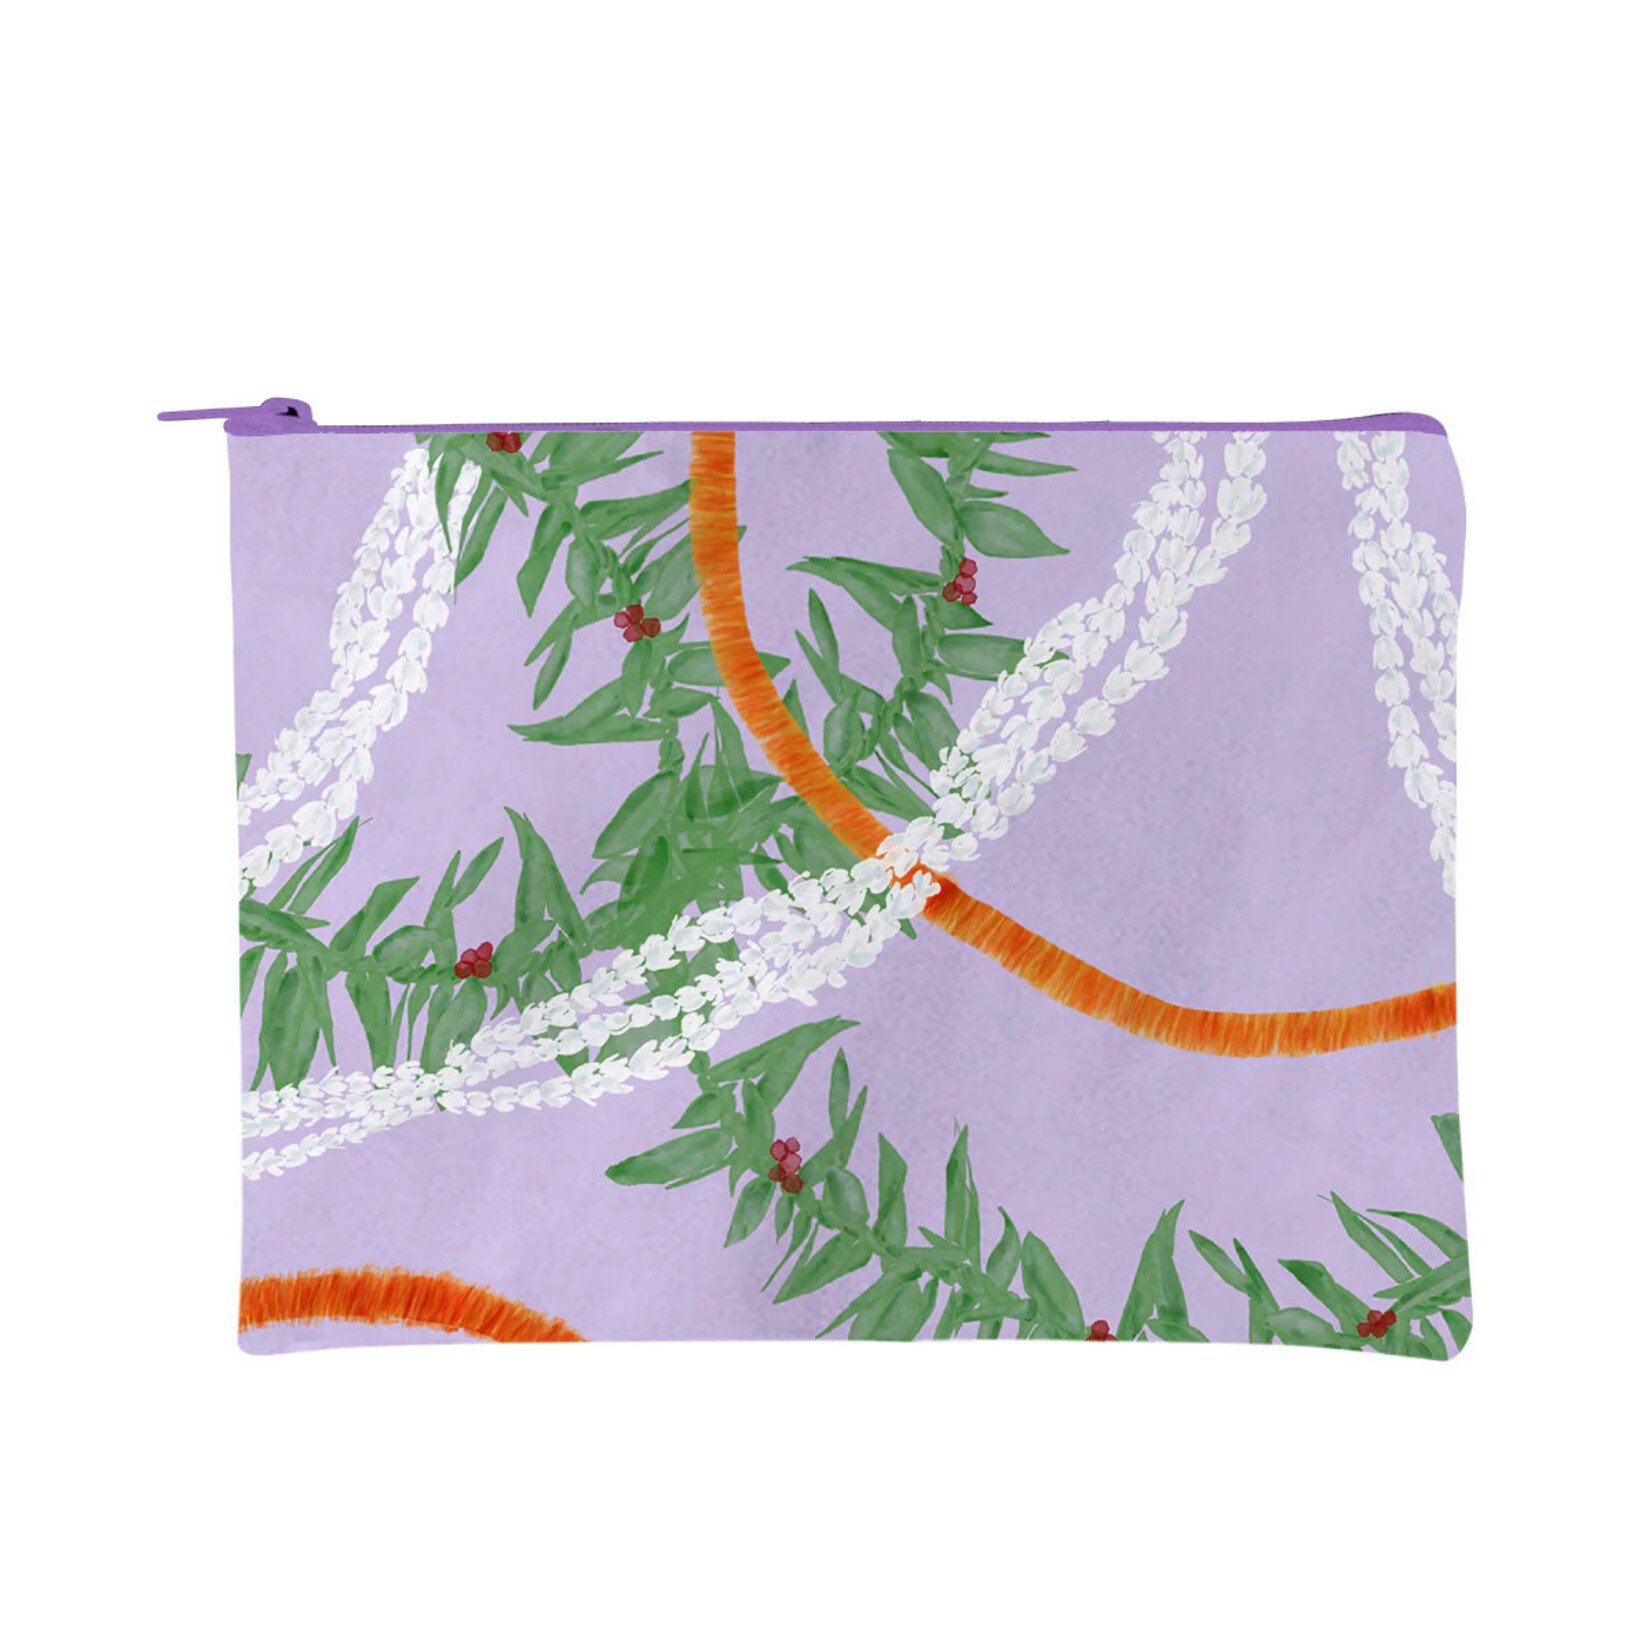 SoHa Living X-Large Pouch -